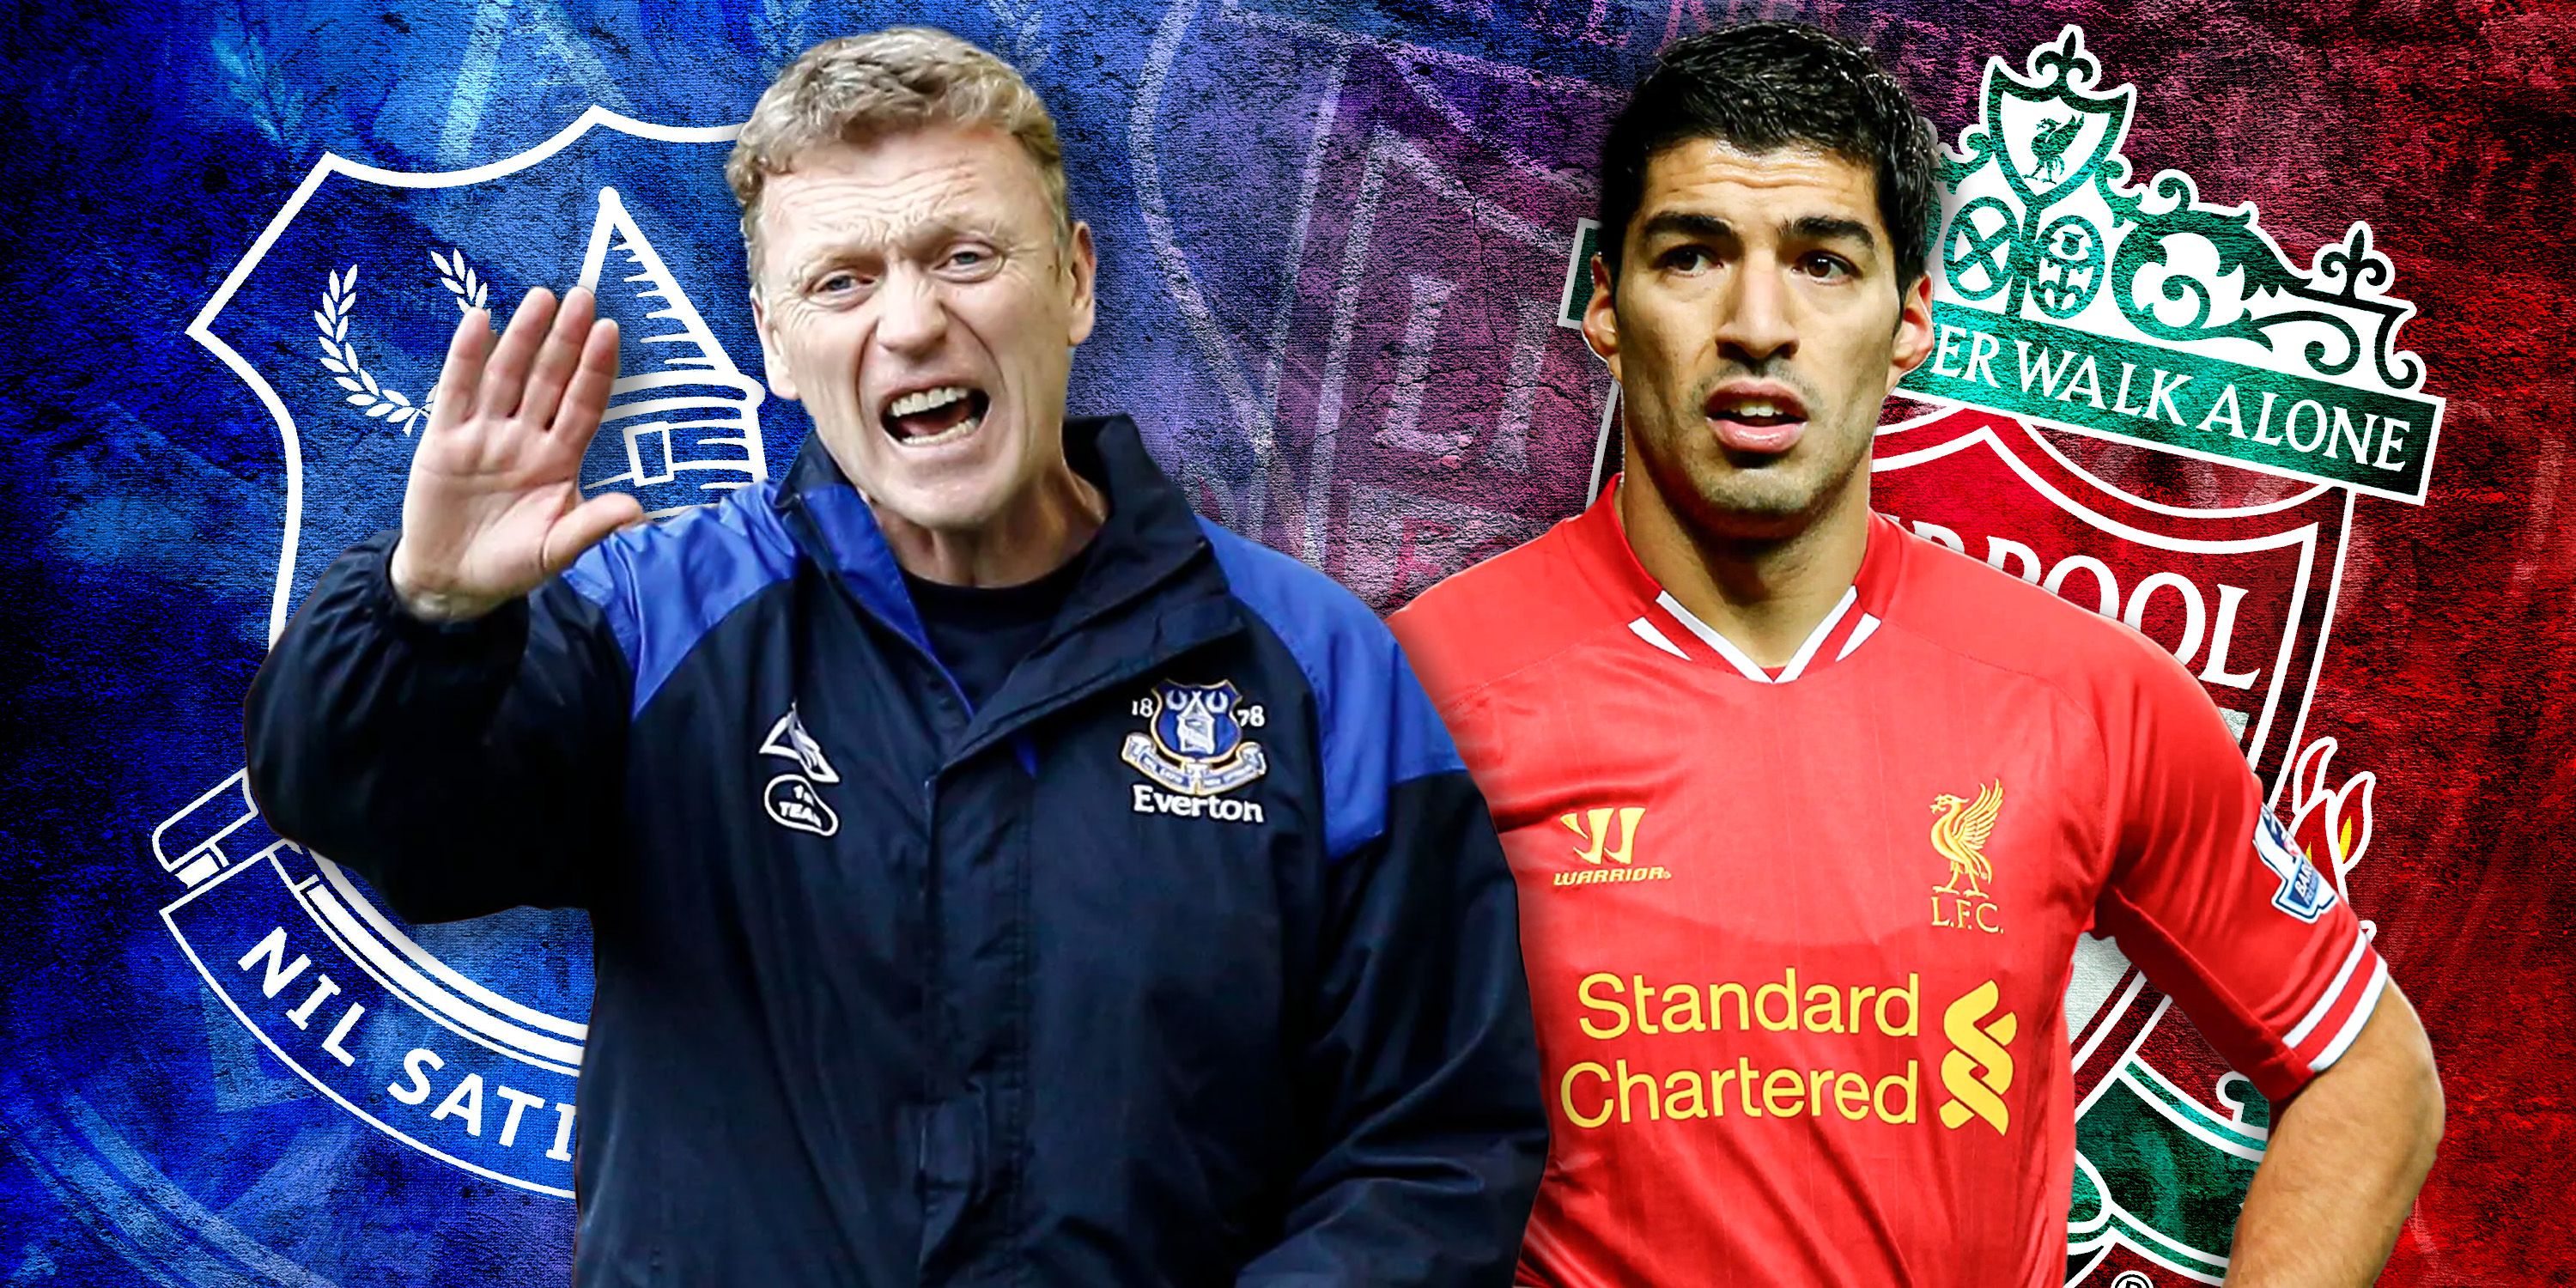 A composite image of David Moyes as Everton manager opposite Liverpool's Luis Suarez